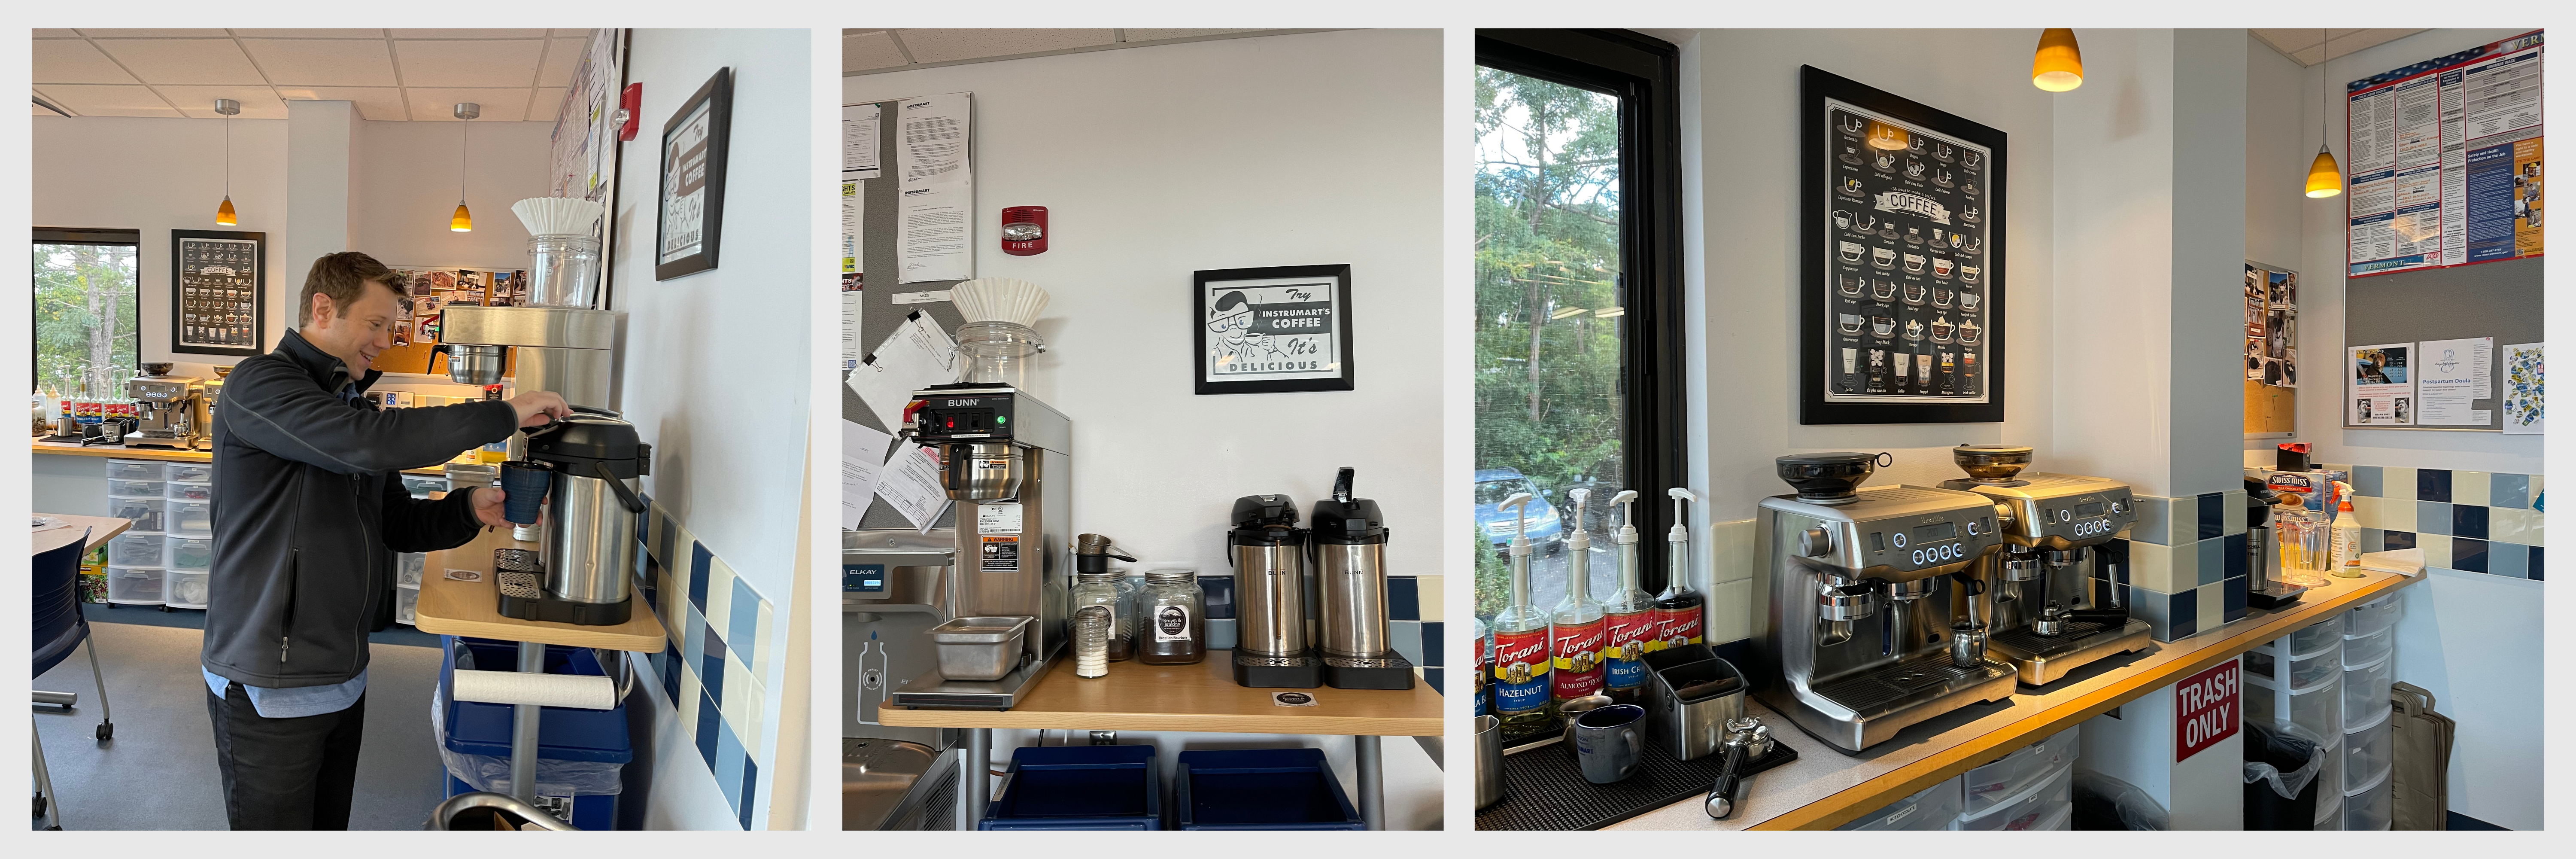 Image of the coffee machines at Instrumart's office.